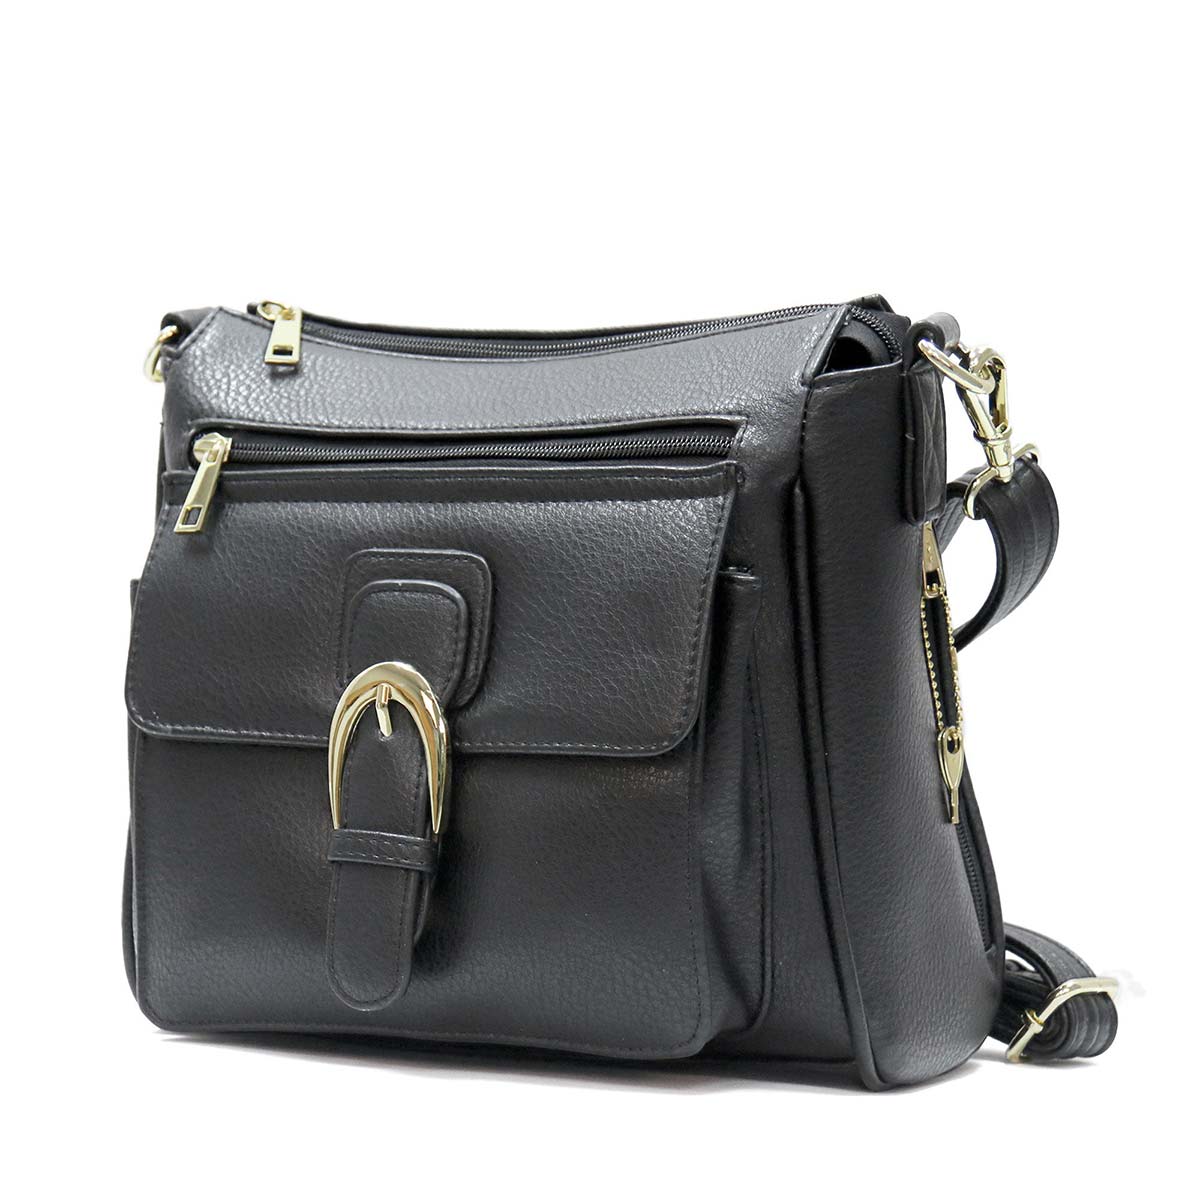 Hot Leathers PUA1176 Black Vegan Leather Concealed Carry Purse with Ambidextrous Design